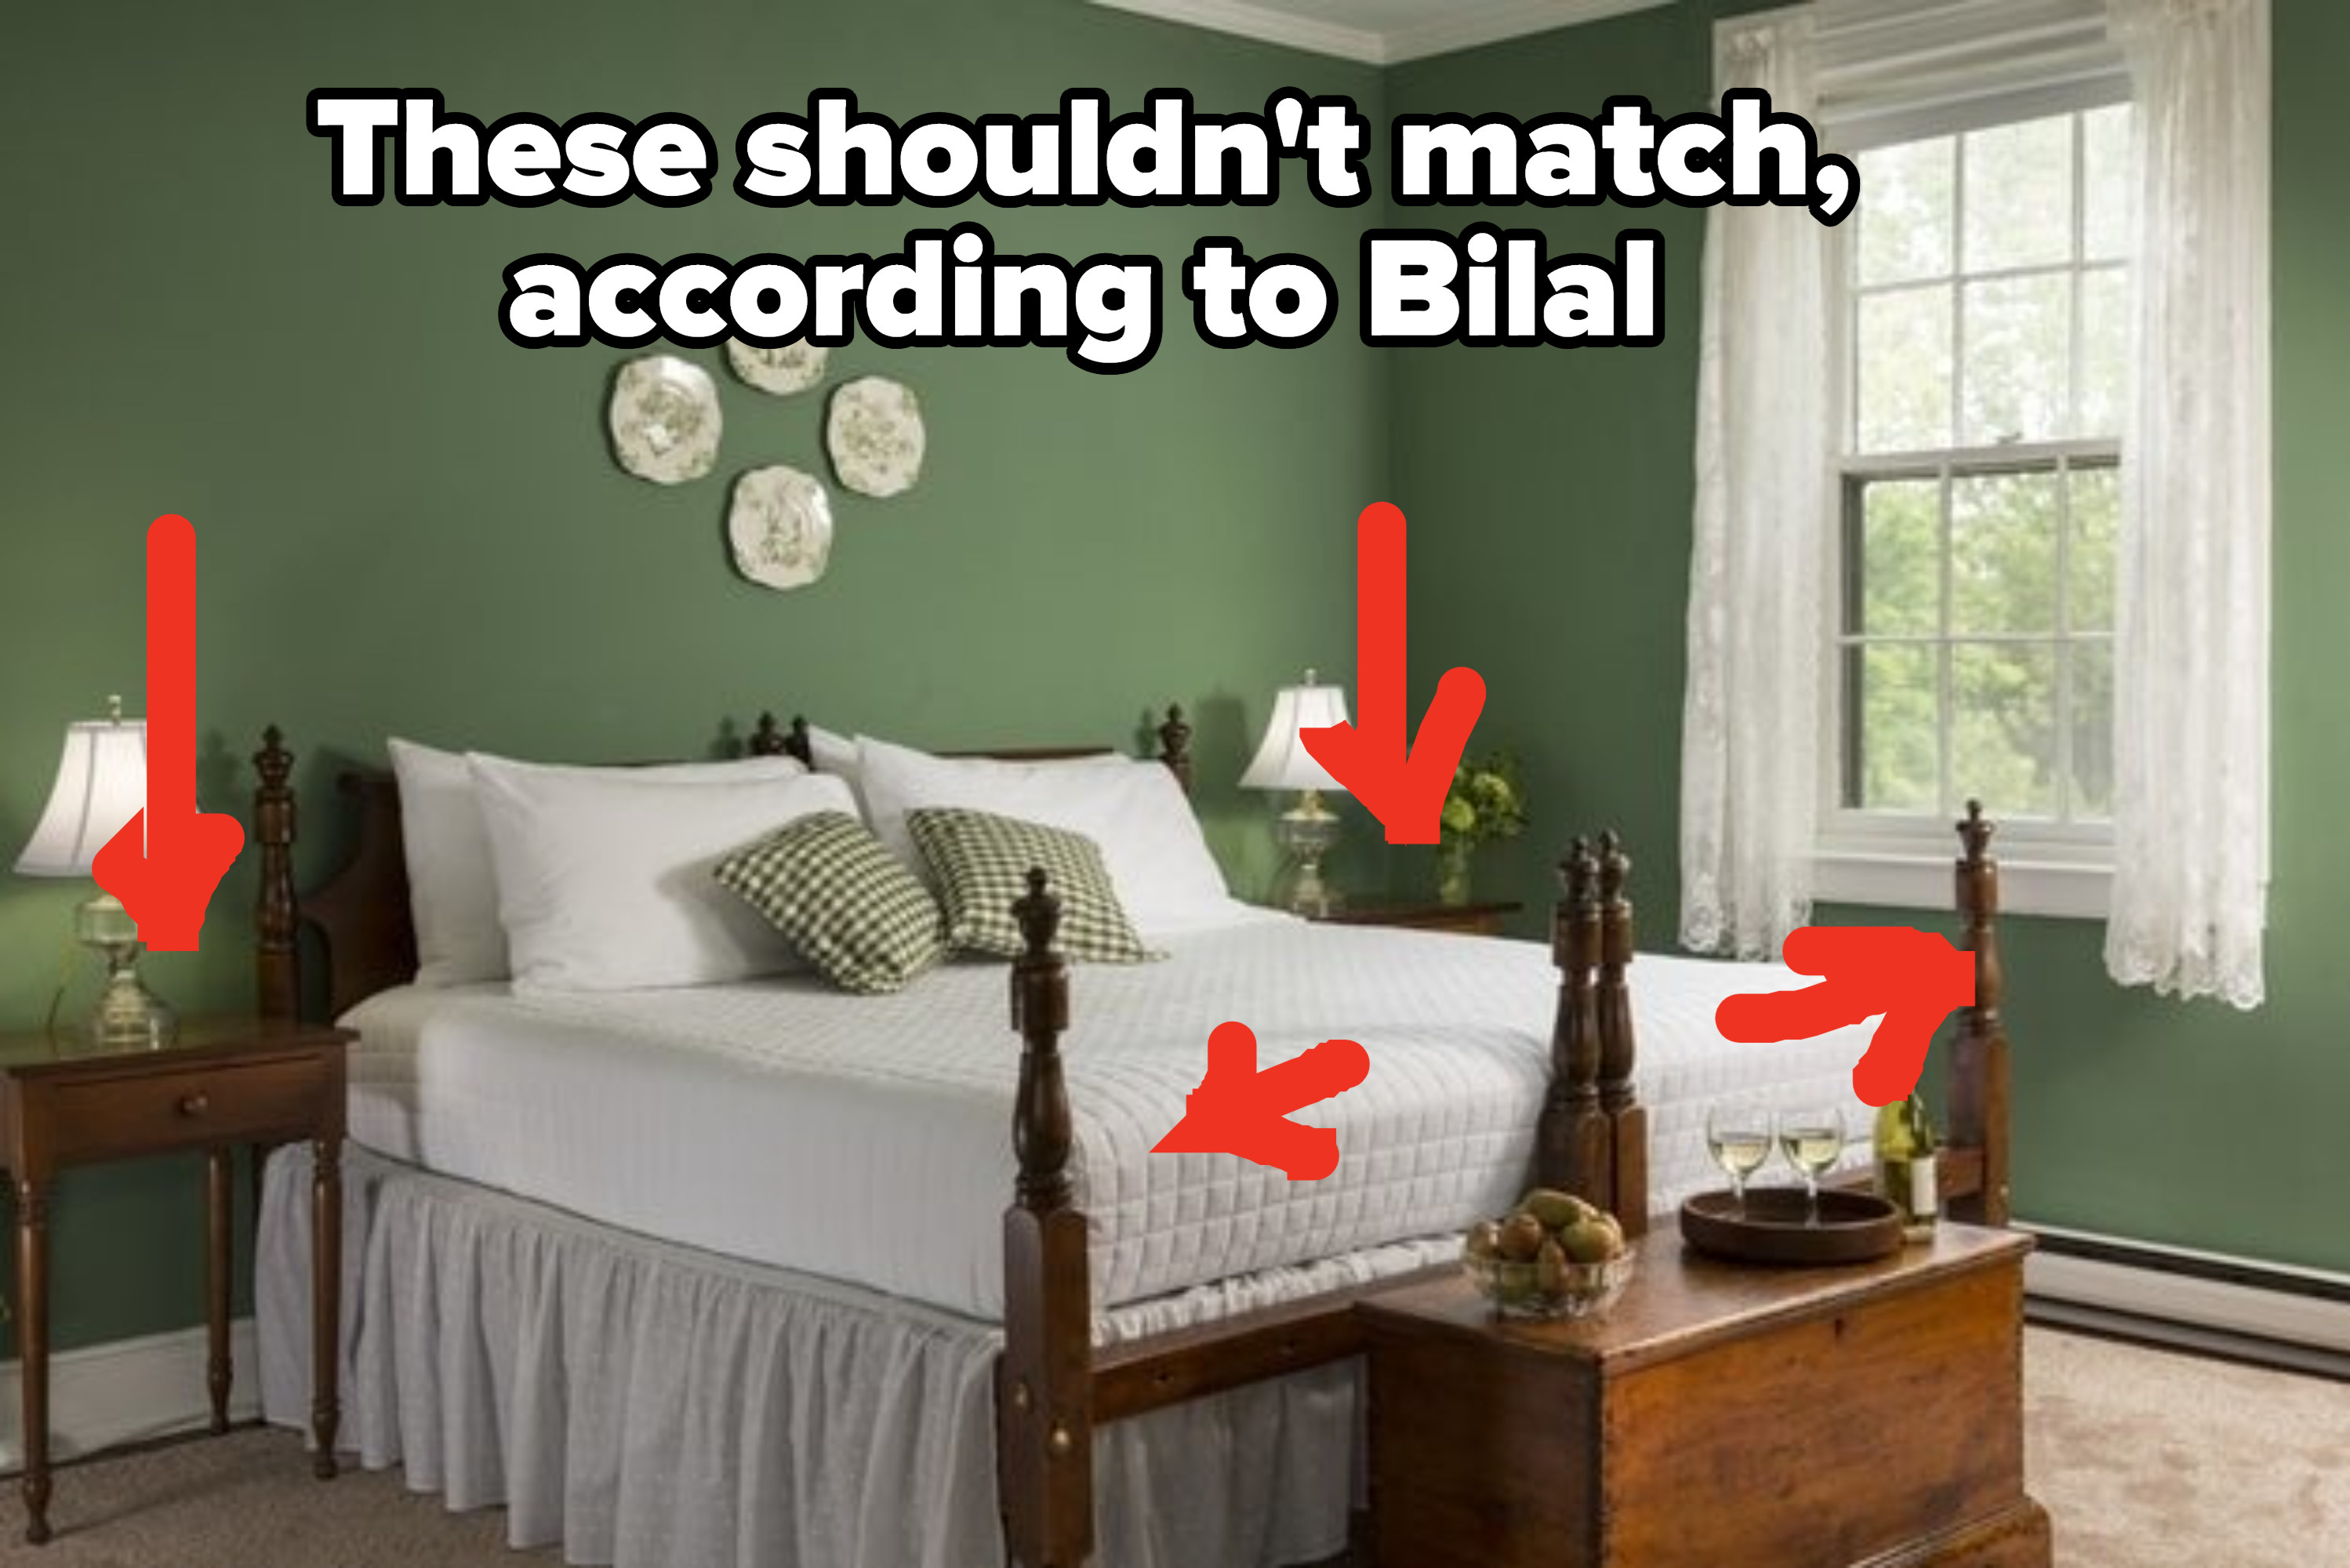 Arrows pointing to different parts of a bedroom set